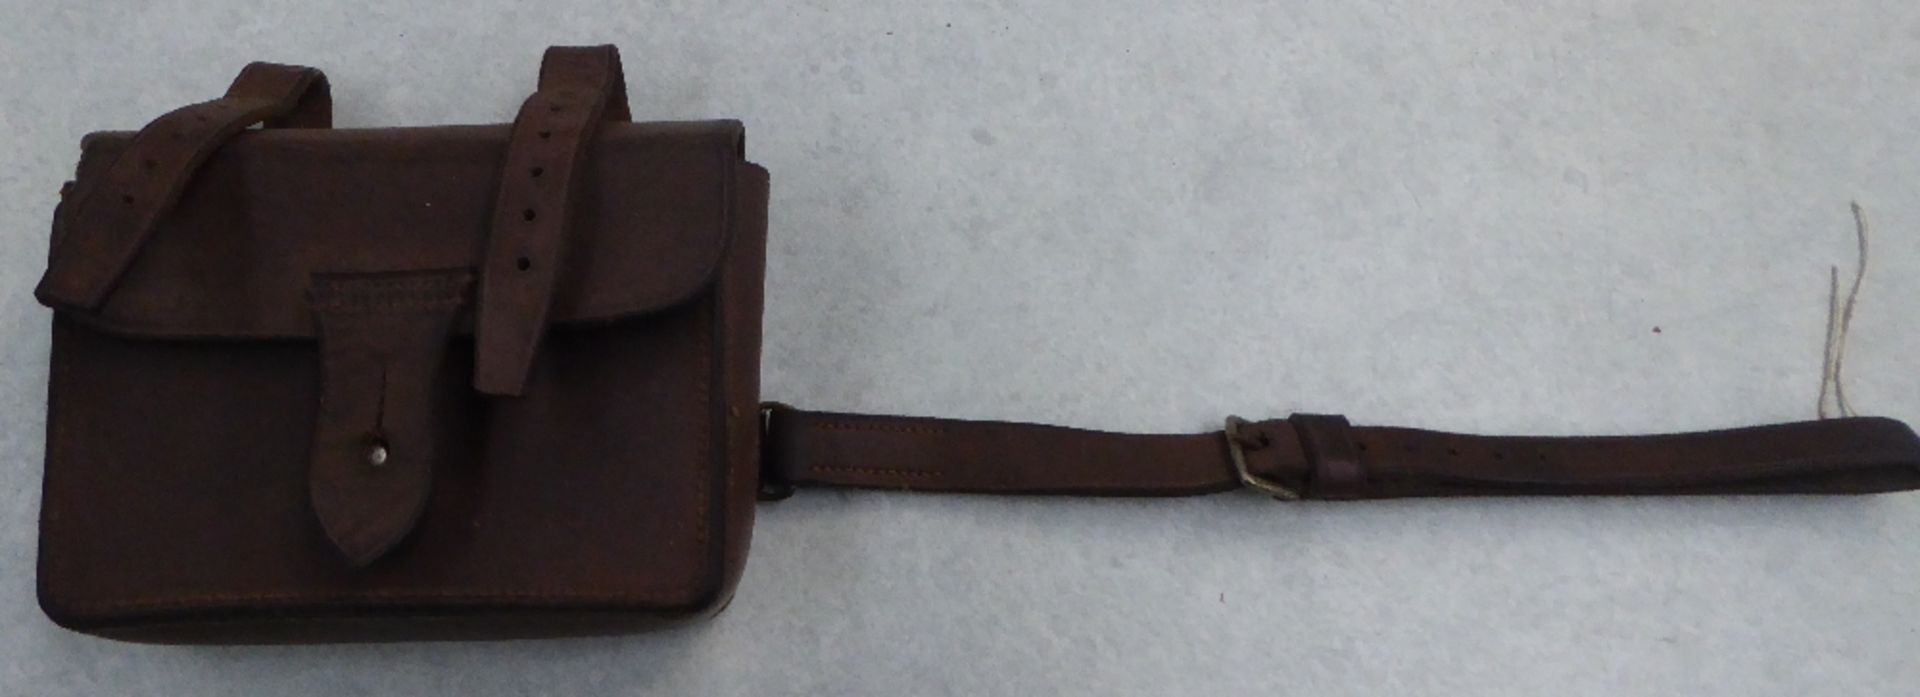 Leather sandwich case - carries VAT. - Image 3 of 3